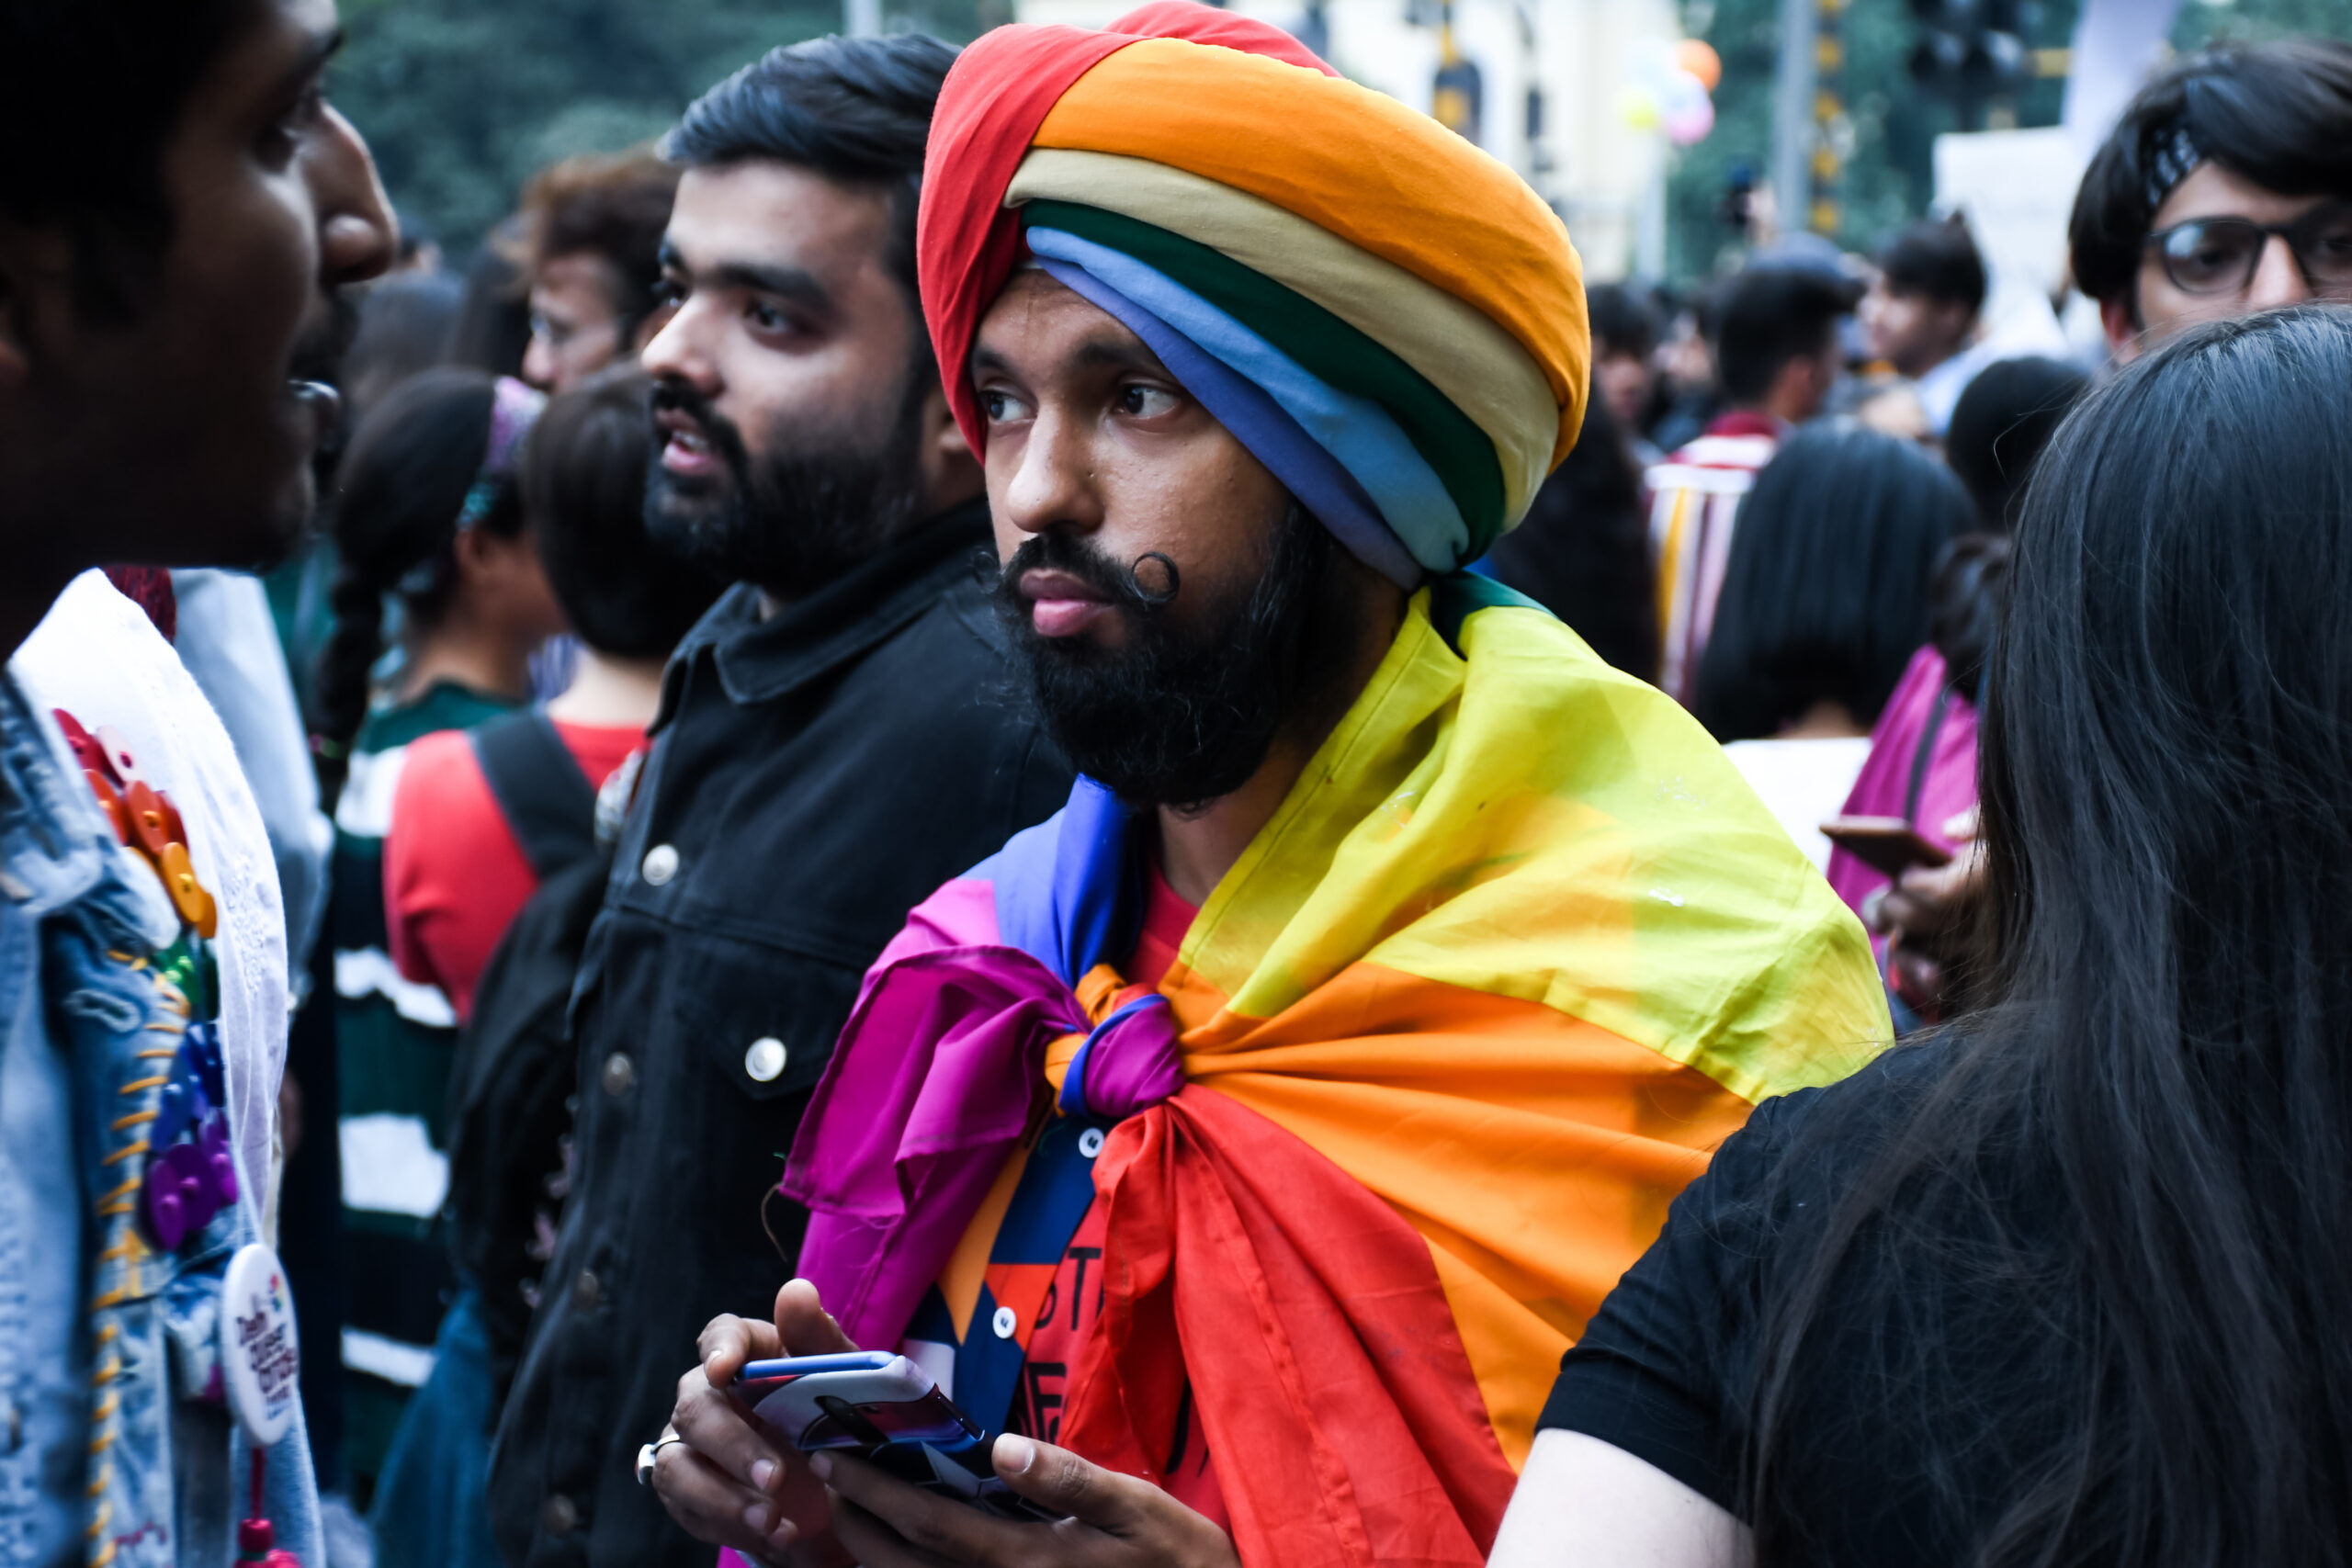 Nov 24, 2019 Delhi queer pride parade 2019 with LGBTQ community members and supporters. Delhi pride parade is organized every year to recognize LGBTQ rights in India